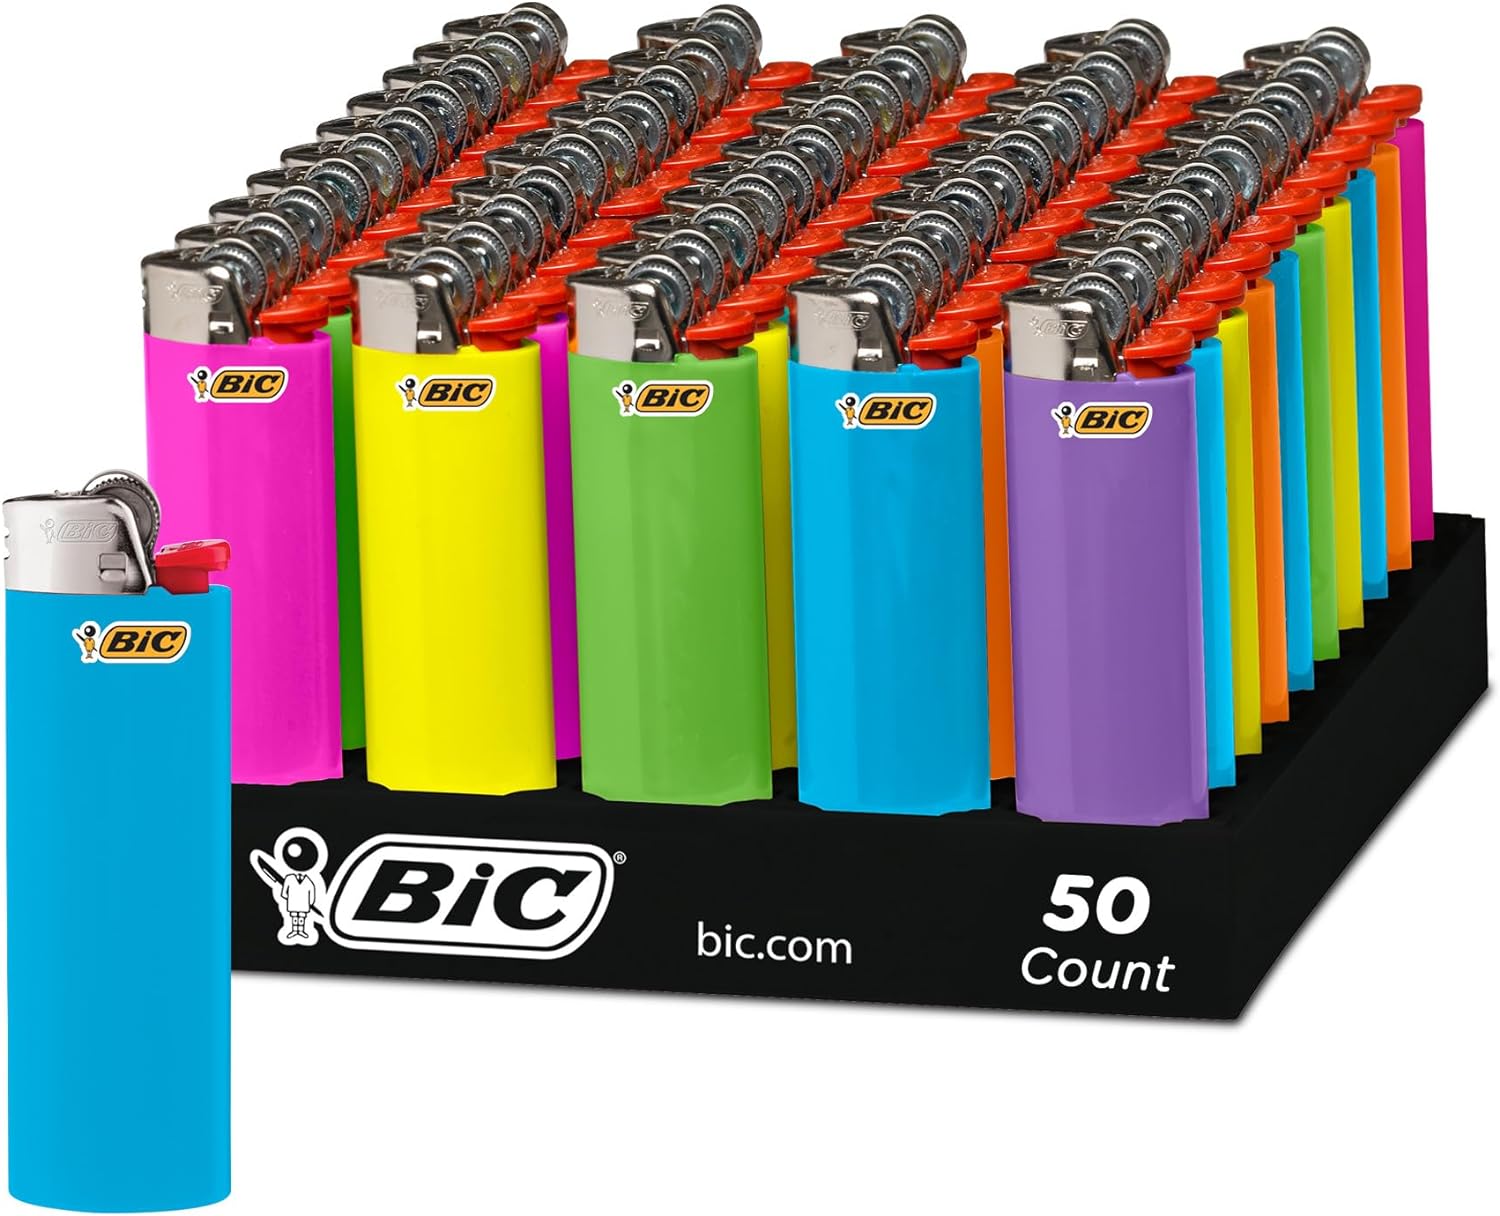 BIC Classic Lighters, Pocket Lighter Style, Fashion Assorted Colors, 50 Count Tray Disposable Lighters